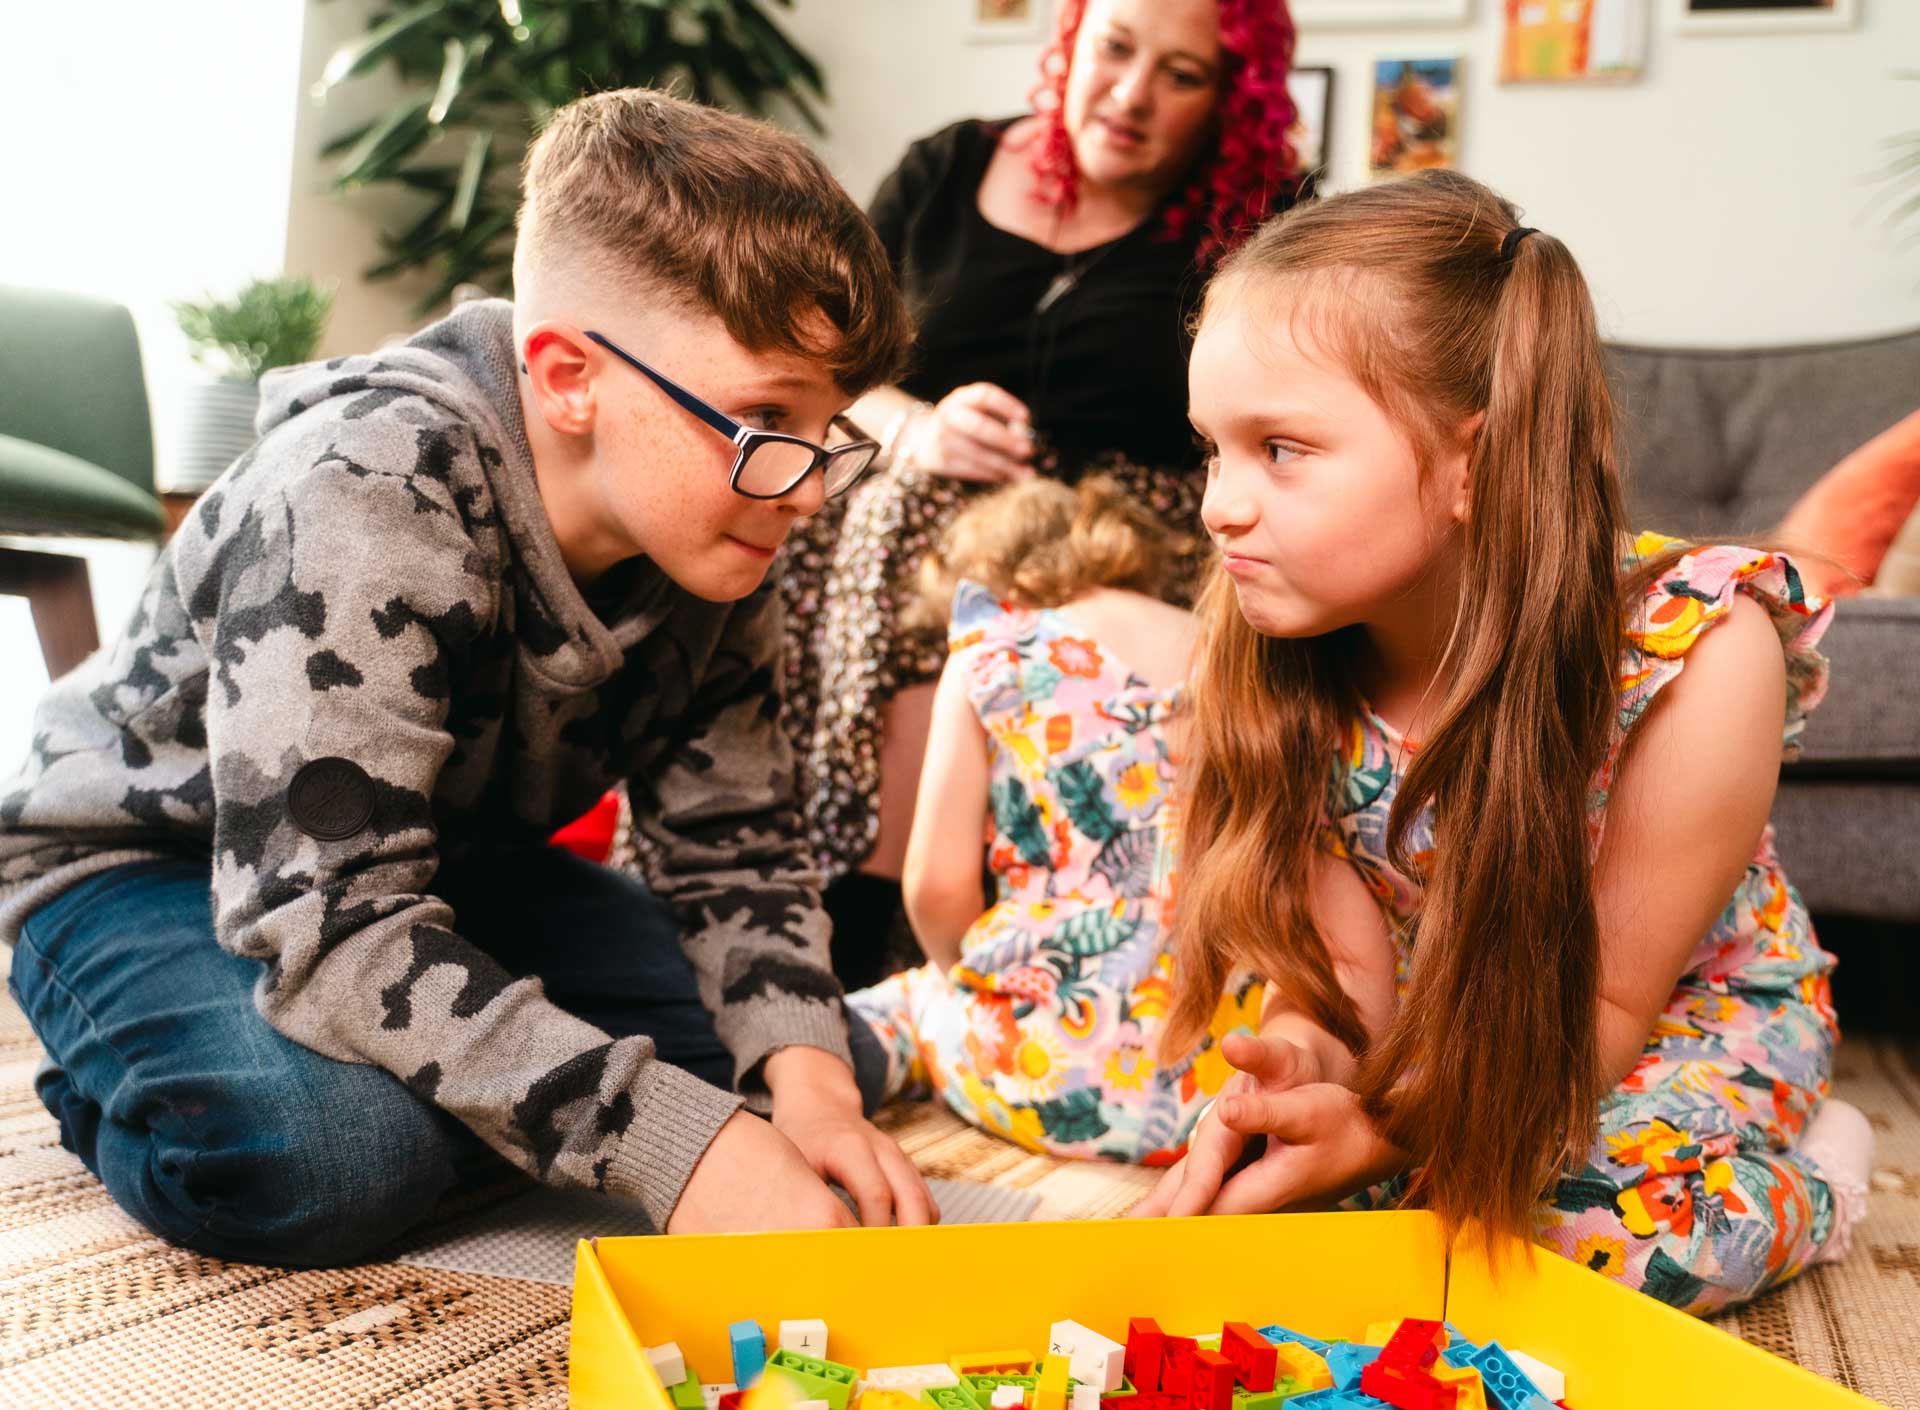 Young boy with vision impairment and his sister looking at each other beside an open box of LEGO® Braille Bricks. Mum watches in the background. The young boy has a pale complexion and short brown hair, who wears black framed glasses. His mum has a pale complexion and vibrant pink curly hair down to her shoulders. His sister has a pale complexion and light brown hair.